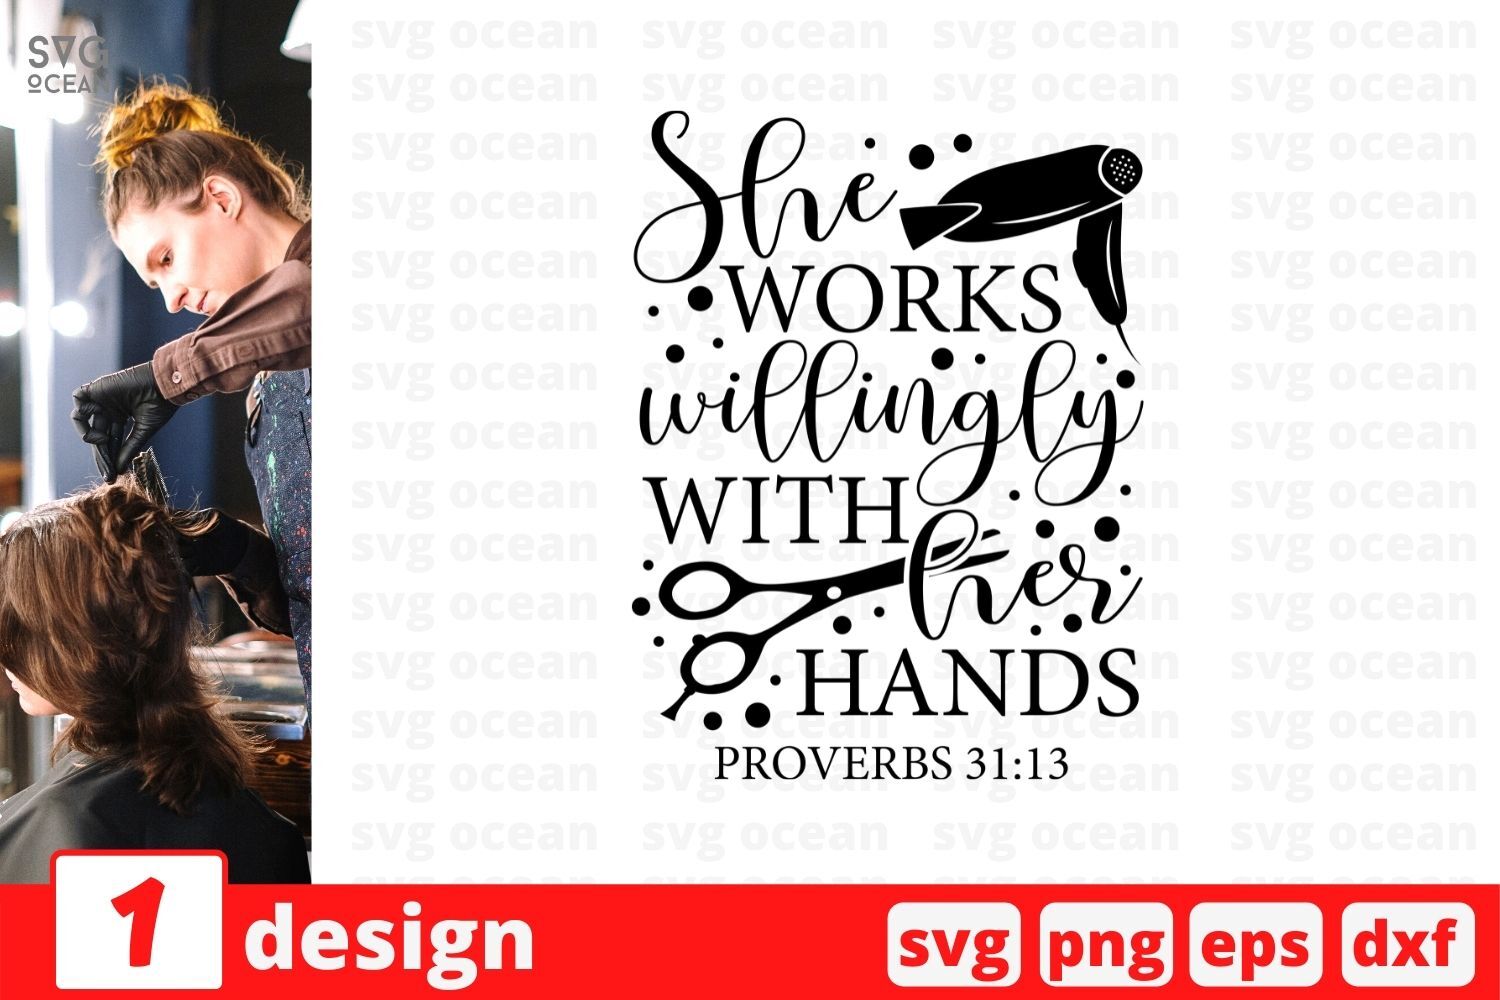 She Works Willingly With Her Hands Proverbs 31 13 Svg Cut File By Svgocean Thehungryjpeg